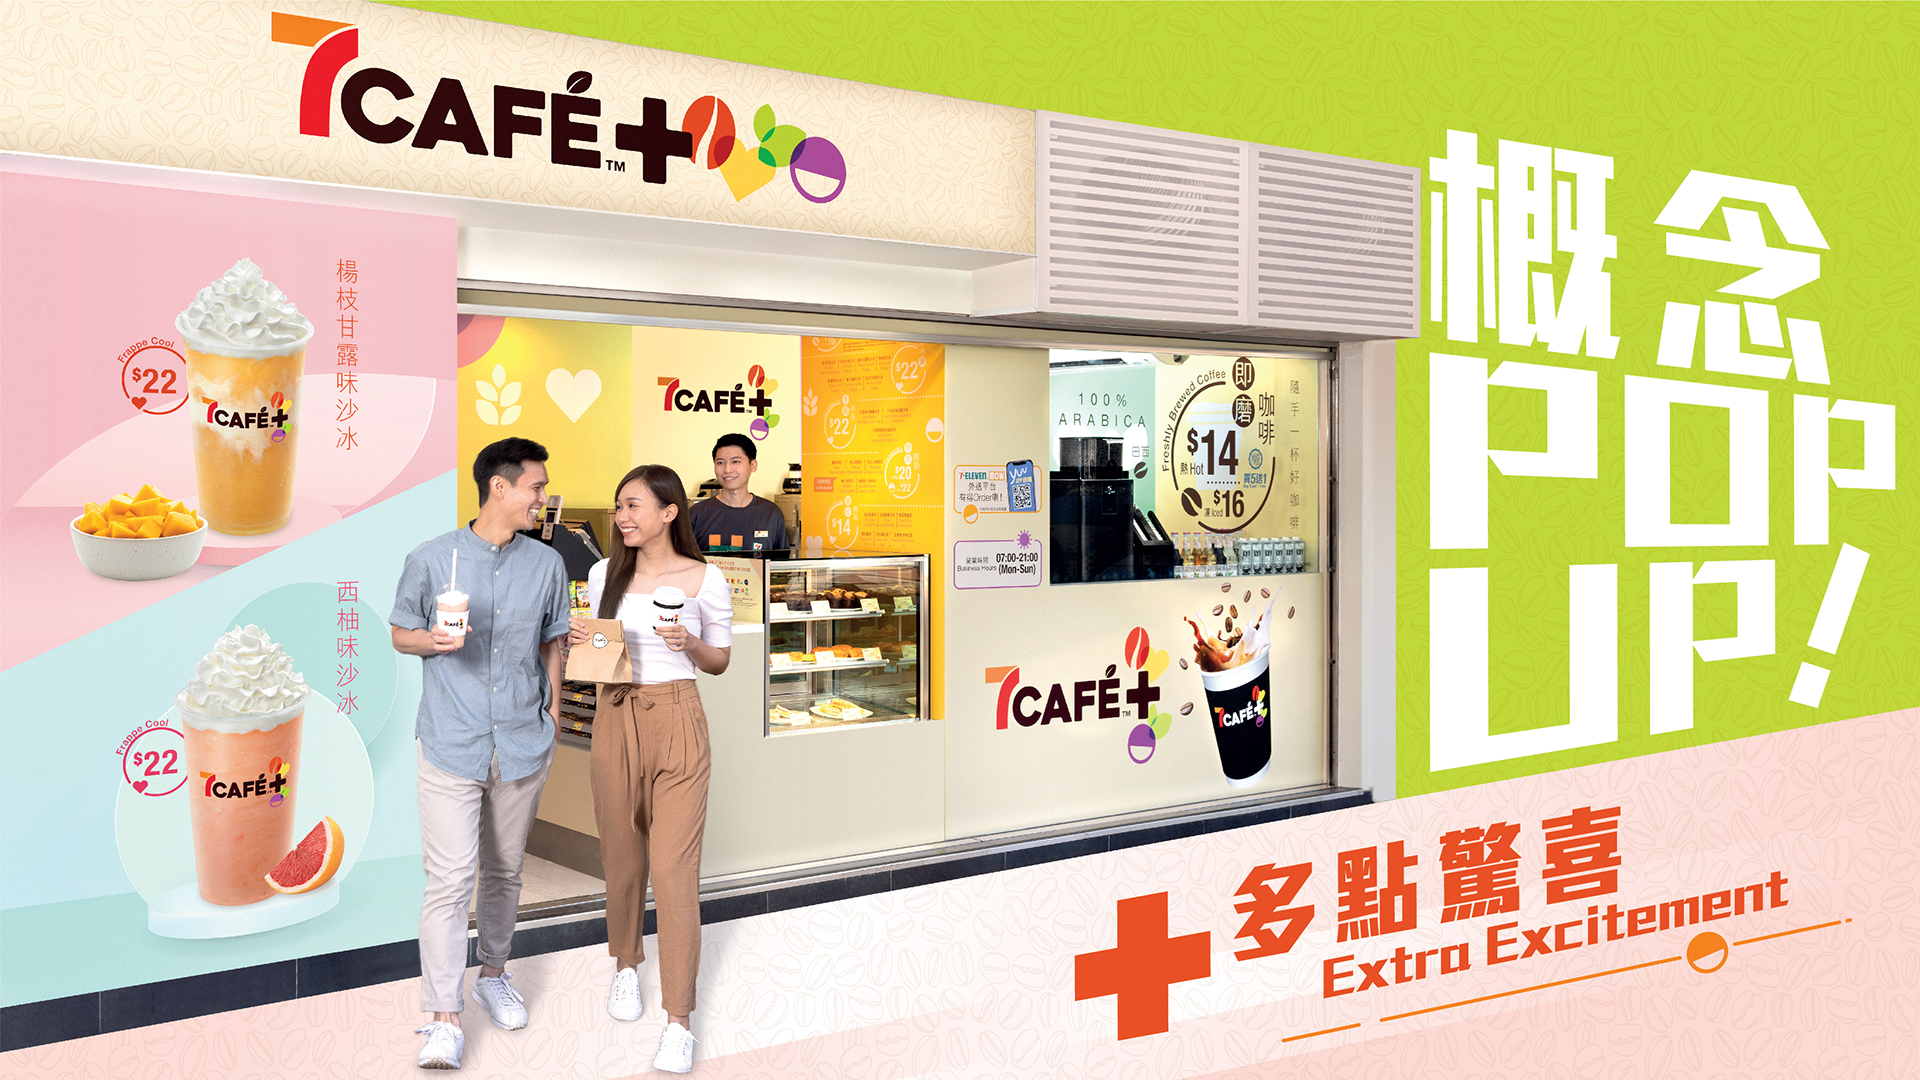 7CAFE+ store front photo